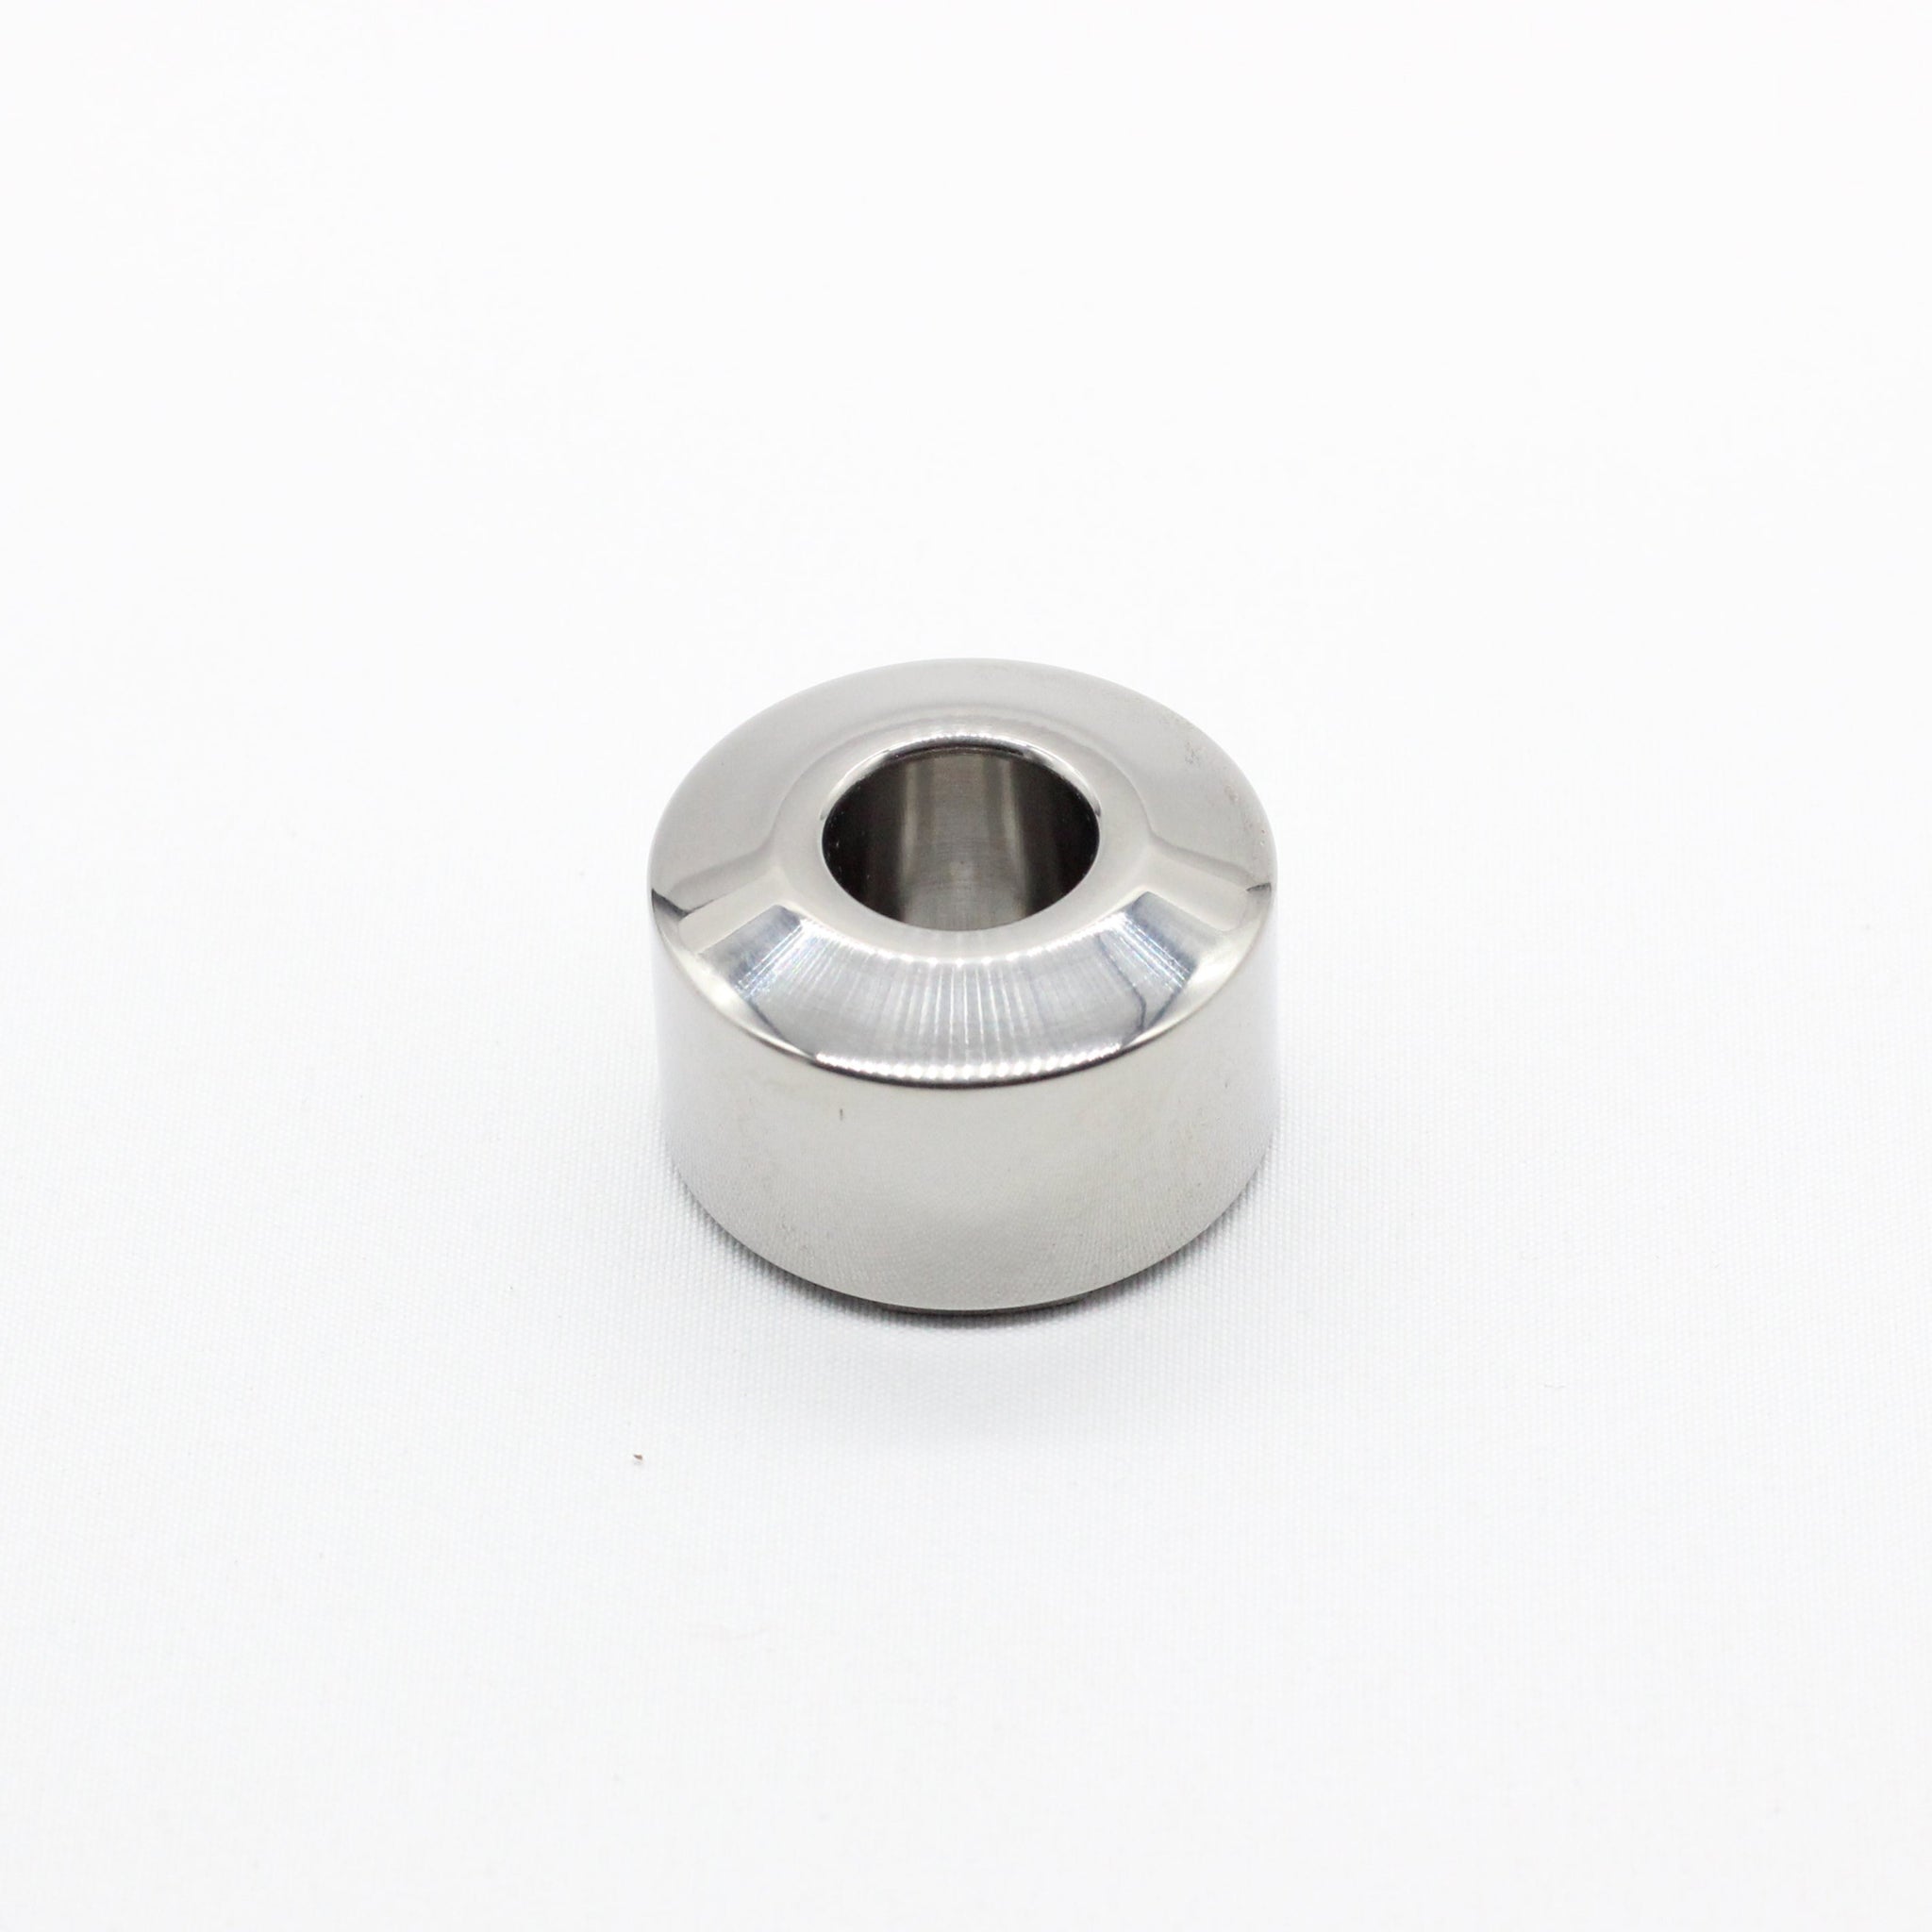 Machined Titanium shaving stand - Titanium safety razor stand - Grade 5 Titanium alloy - Tripod feet to allow water and air to flow - polished finish - works with all carbon shaving co single edge safety shavers